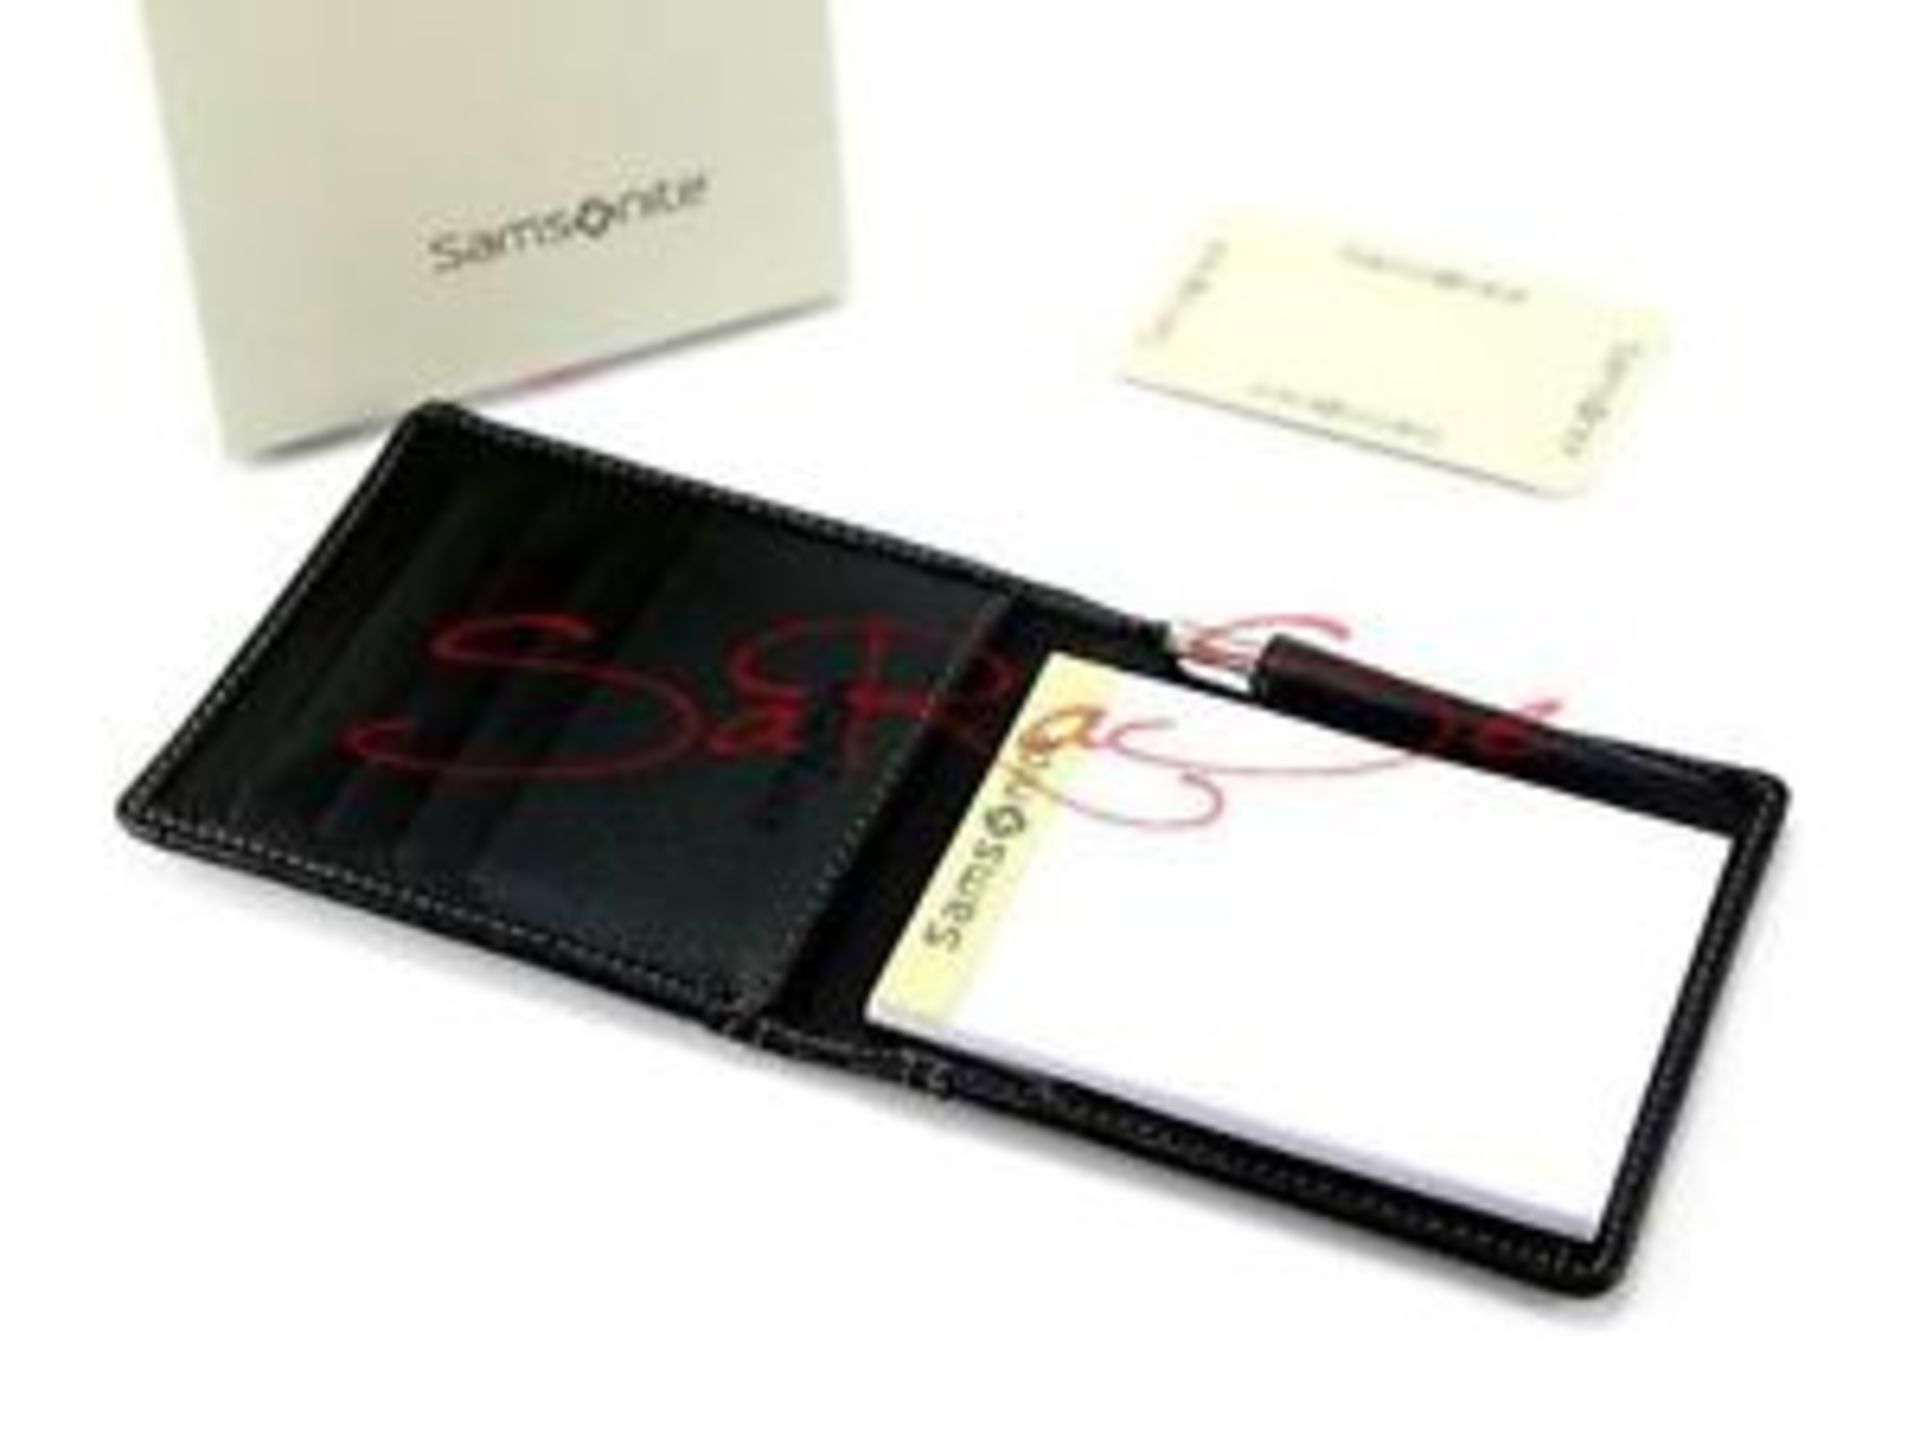 V Samsonite leather goods notepad with pen